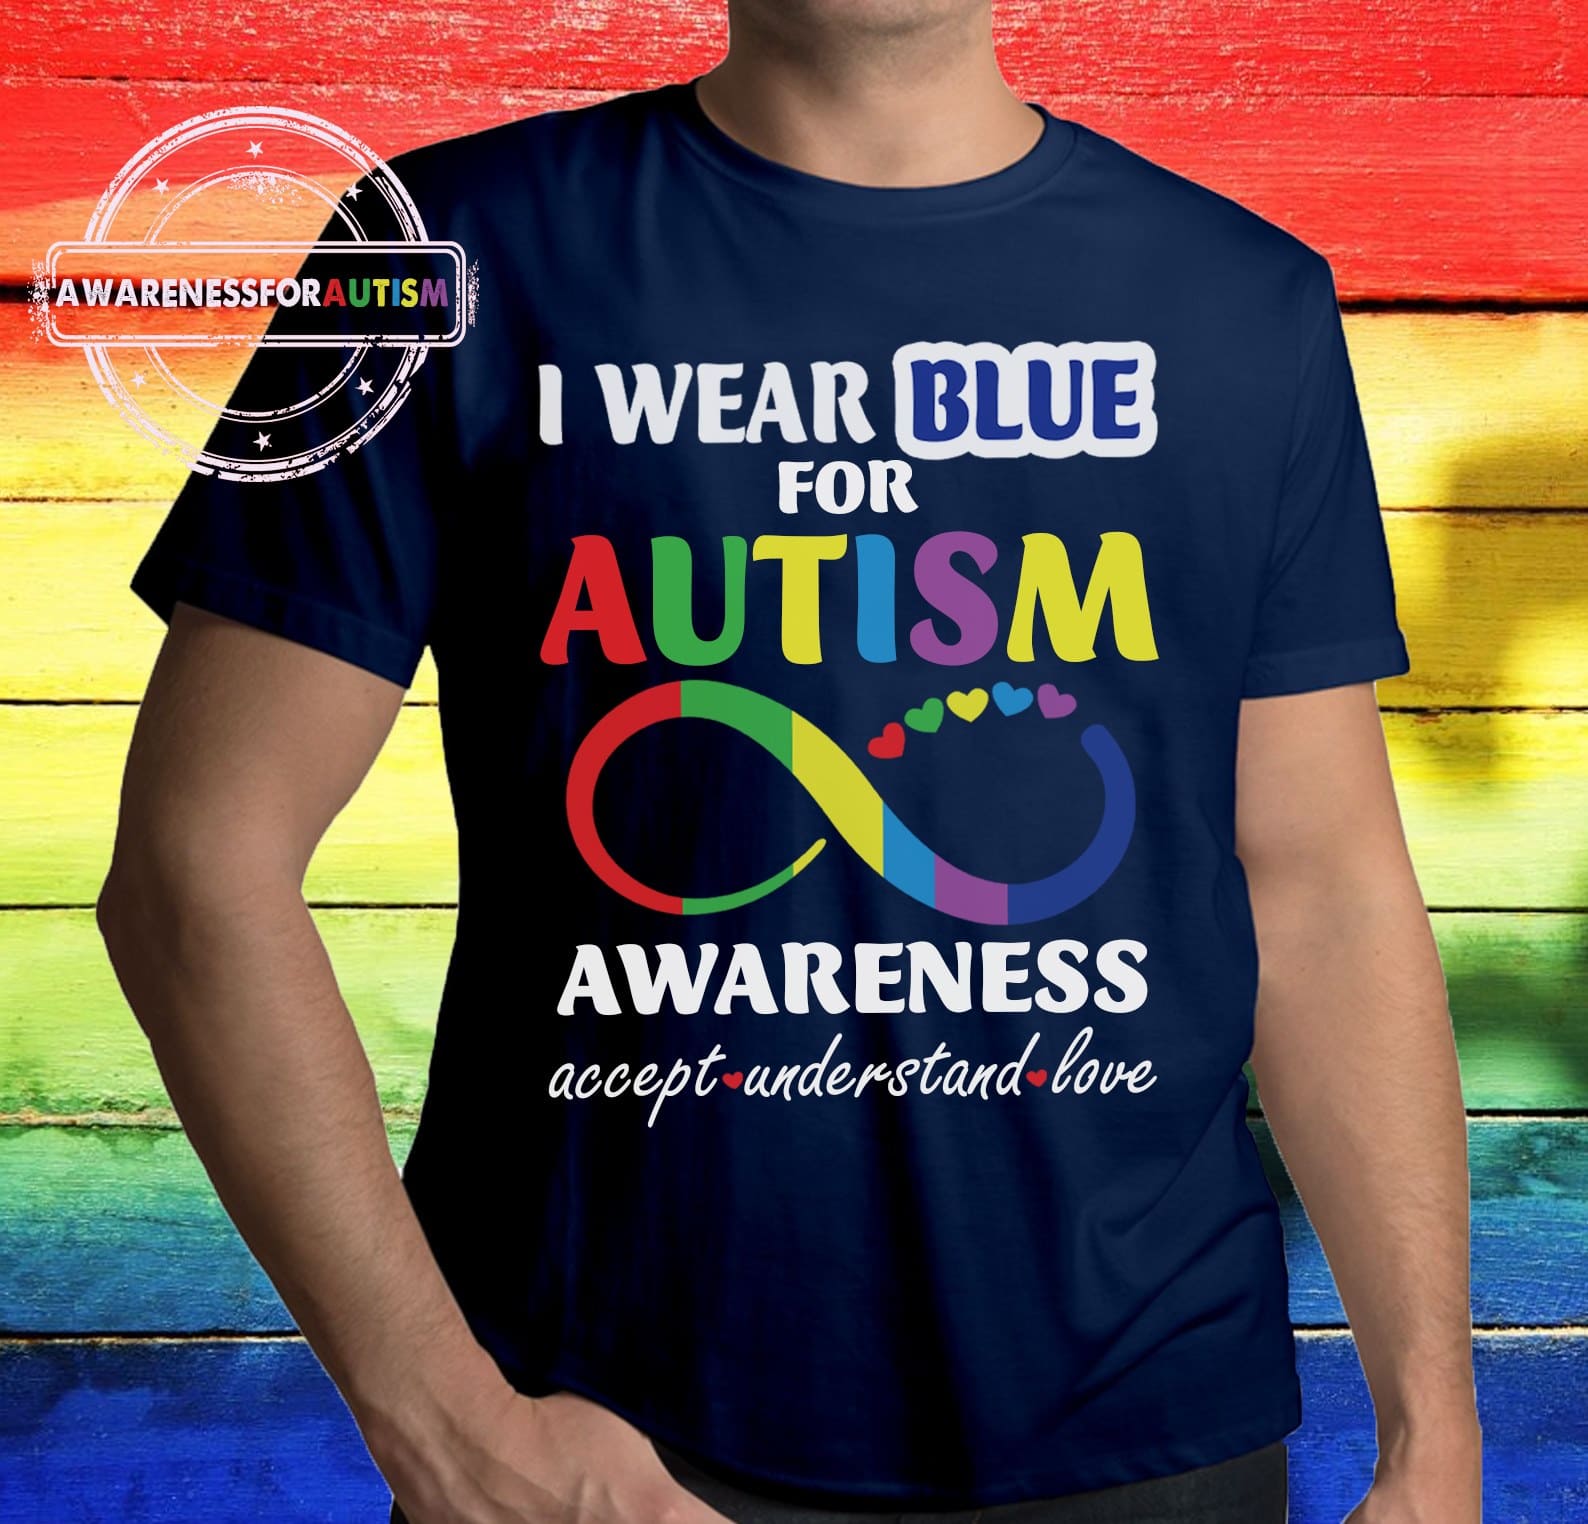 Autism Symbol - I wear blue for autism awareness accept understand love